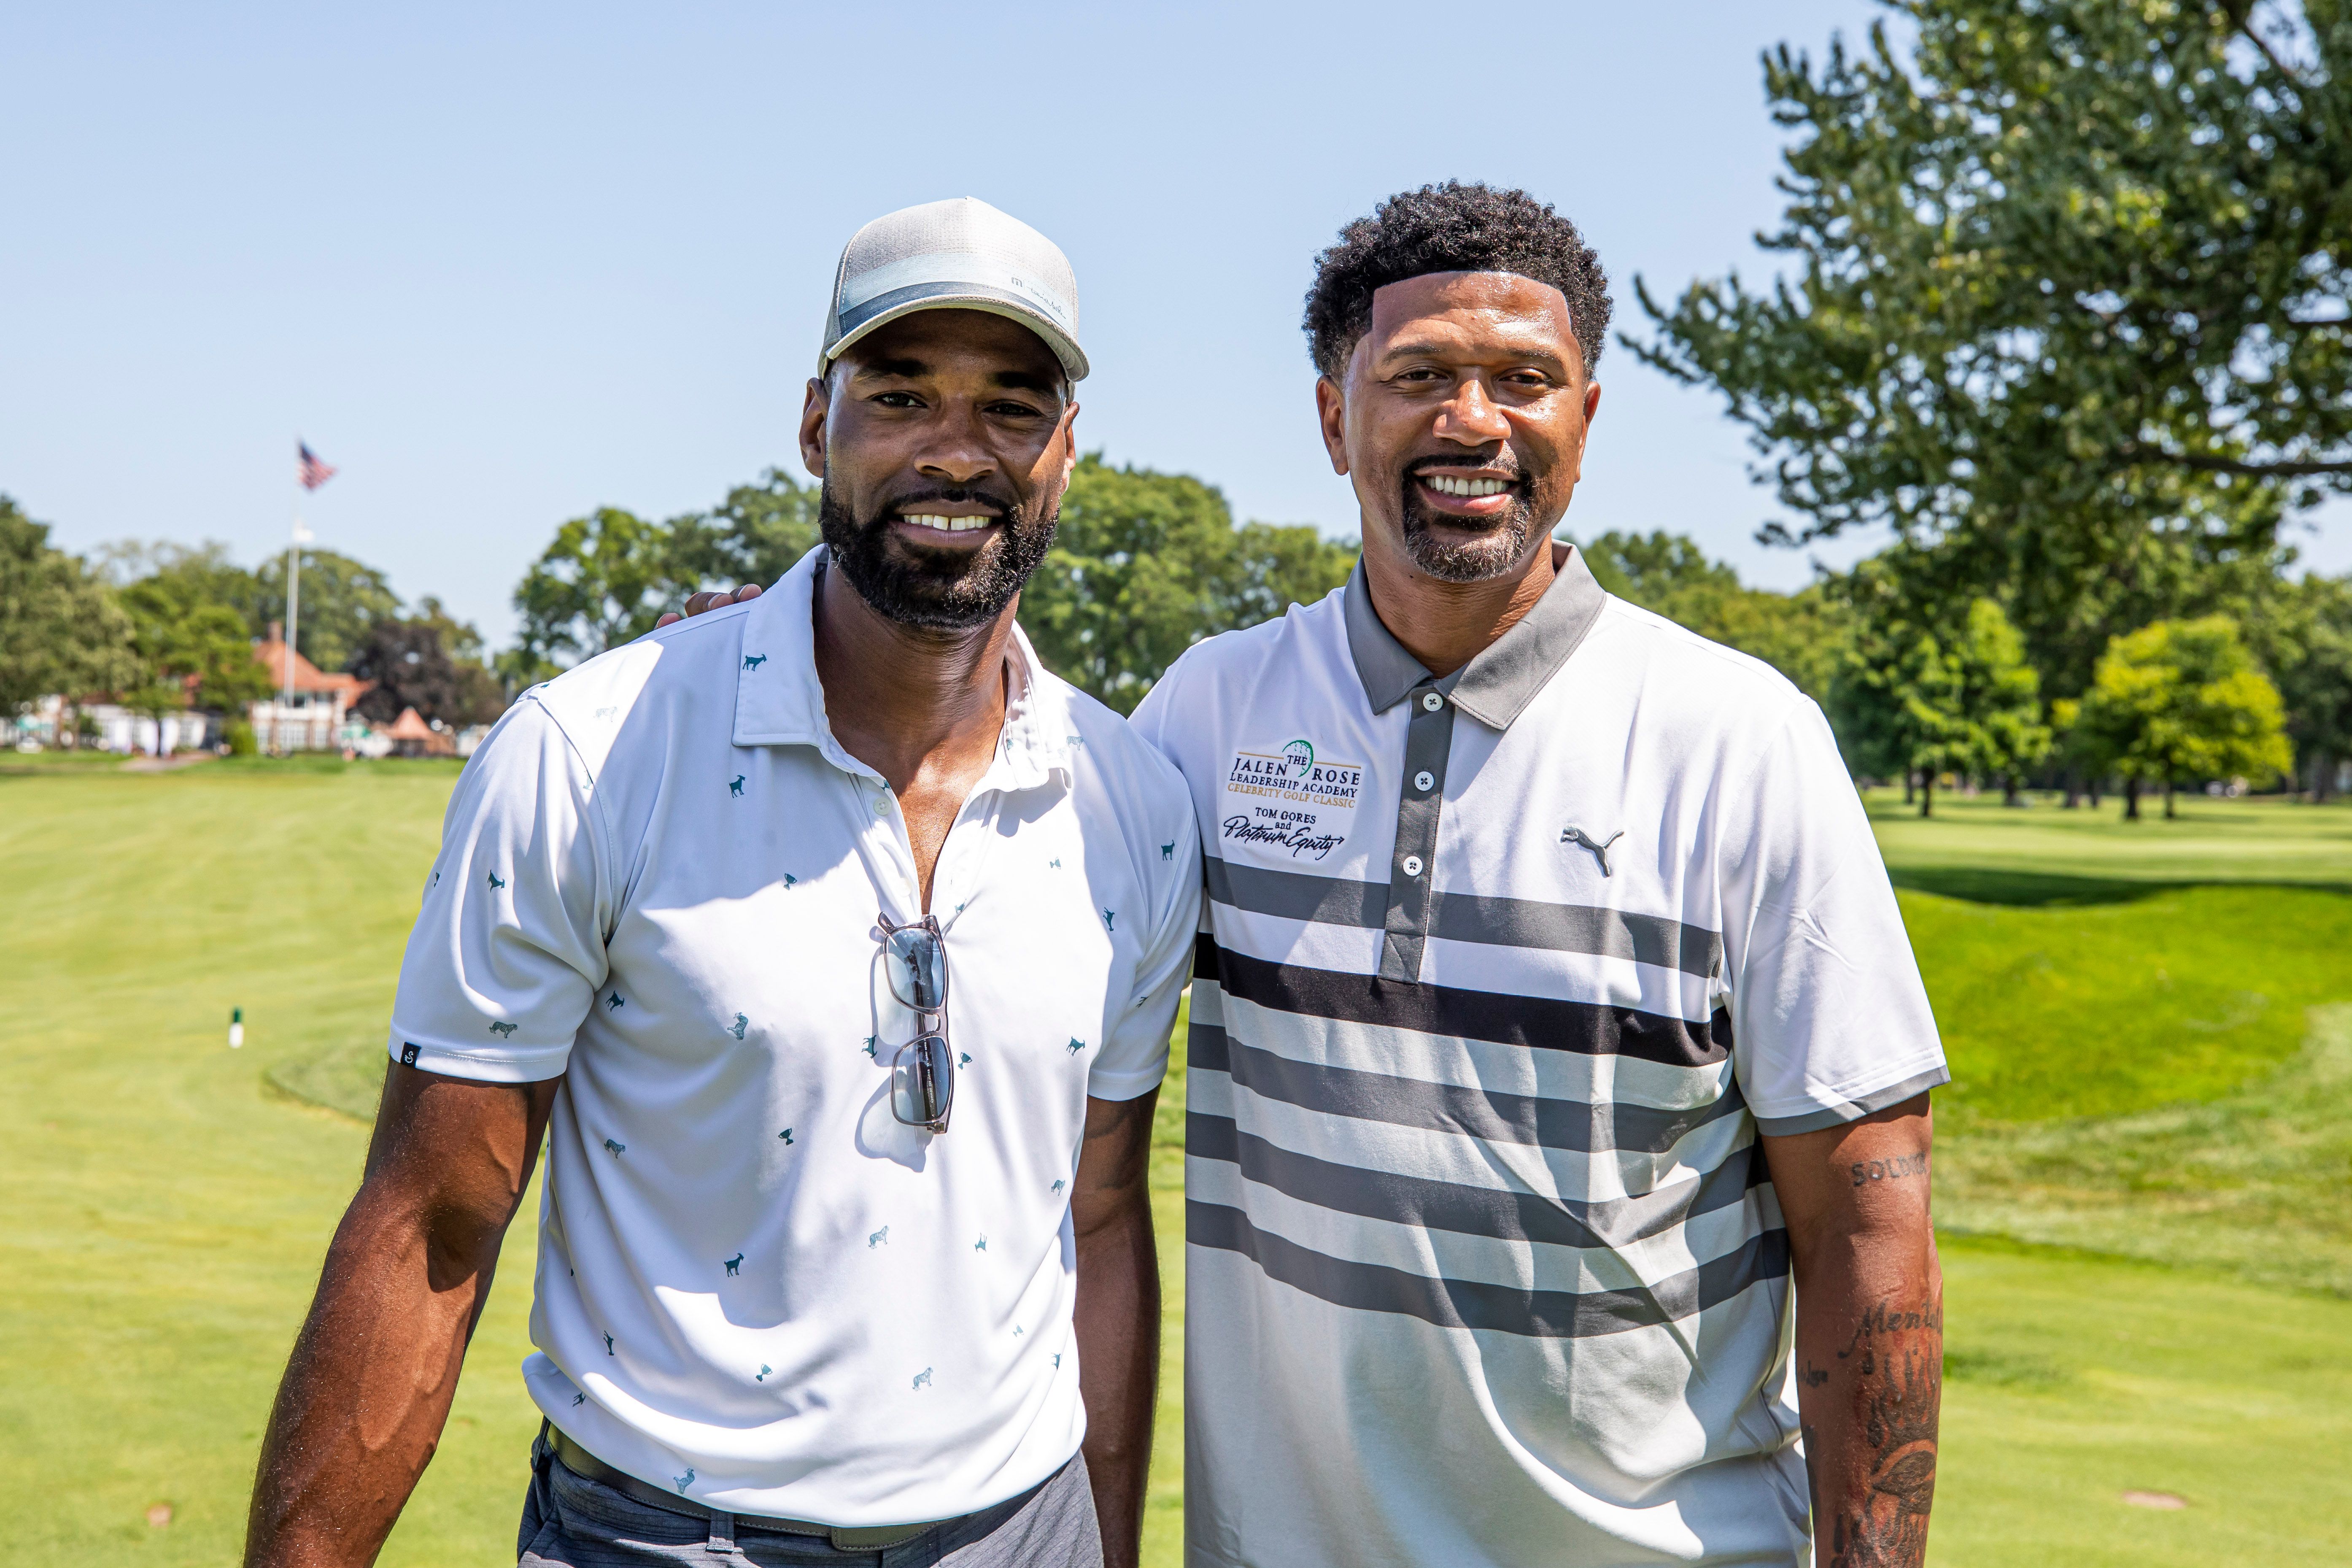 Calvin "Megatron" Johnson and Jalen Rose pose for a picture on the first fairway at Detroit Golf Club at the Jalen Rose Golf Classic, A PGD Global Production